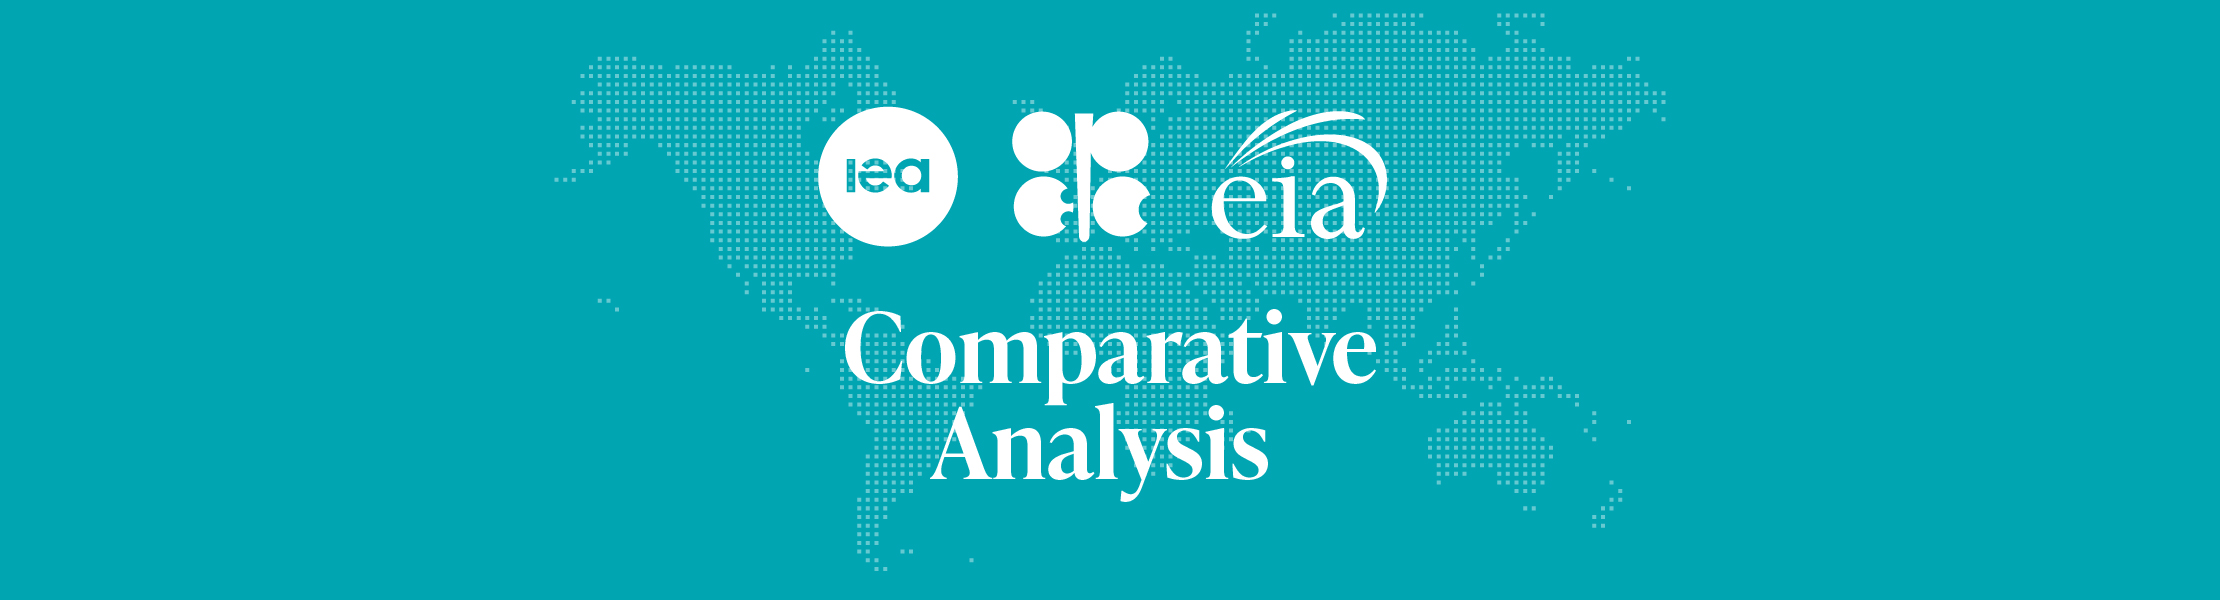 Comparative Analysis of monthly reports on the oil market